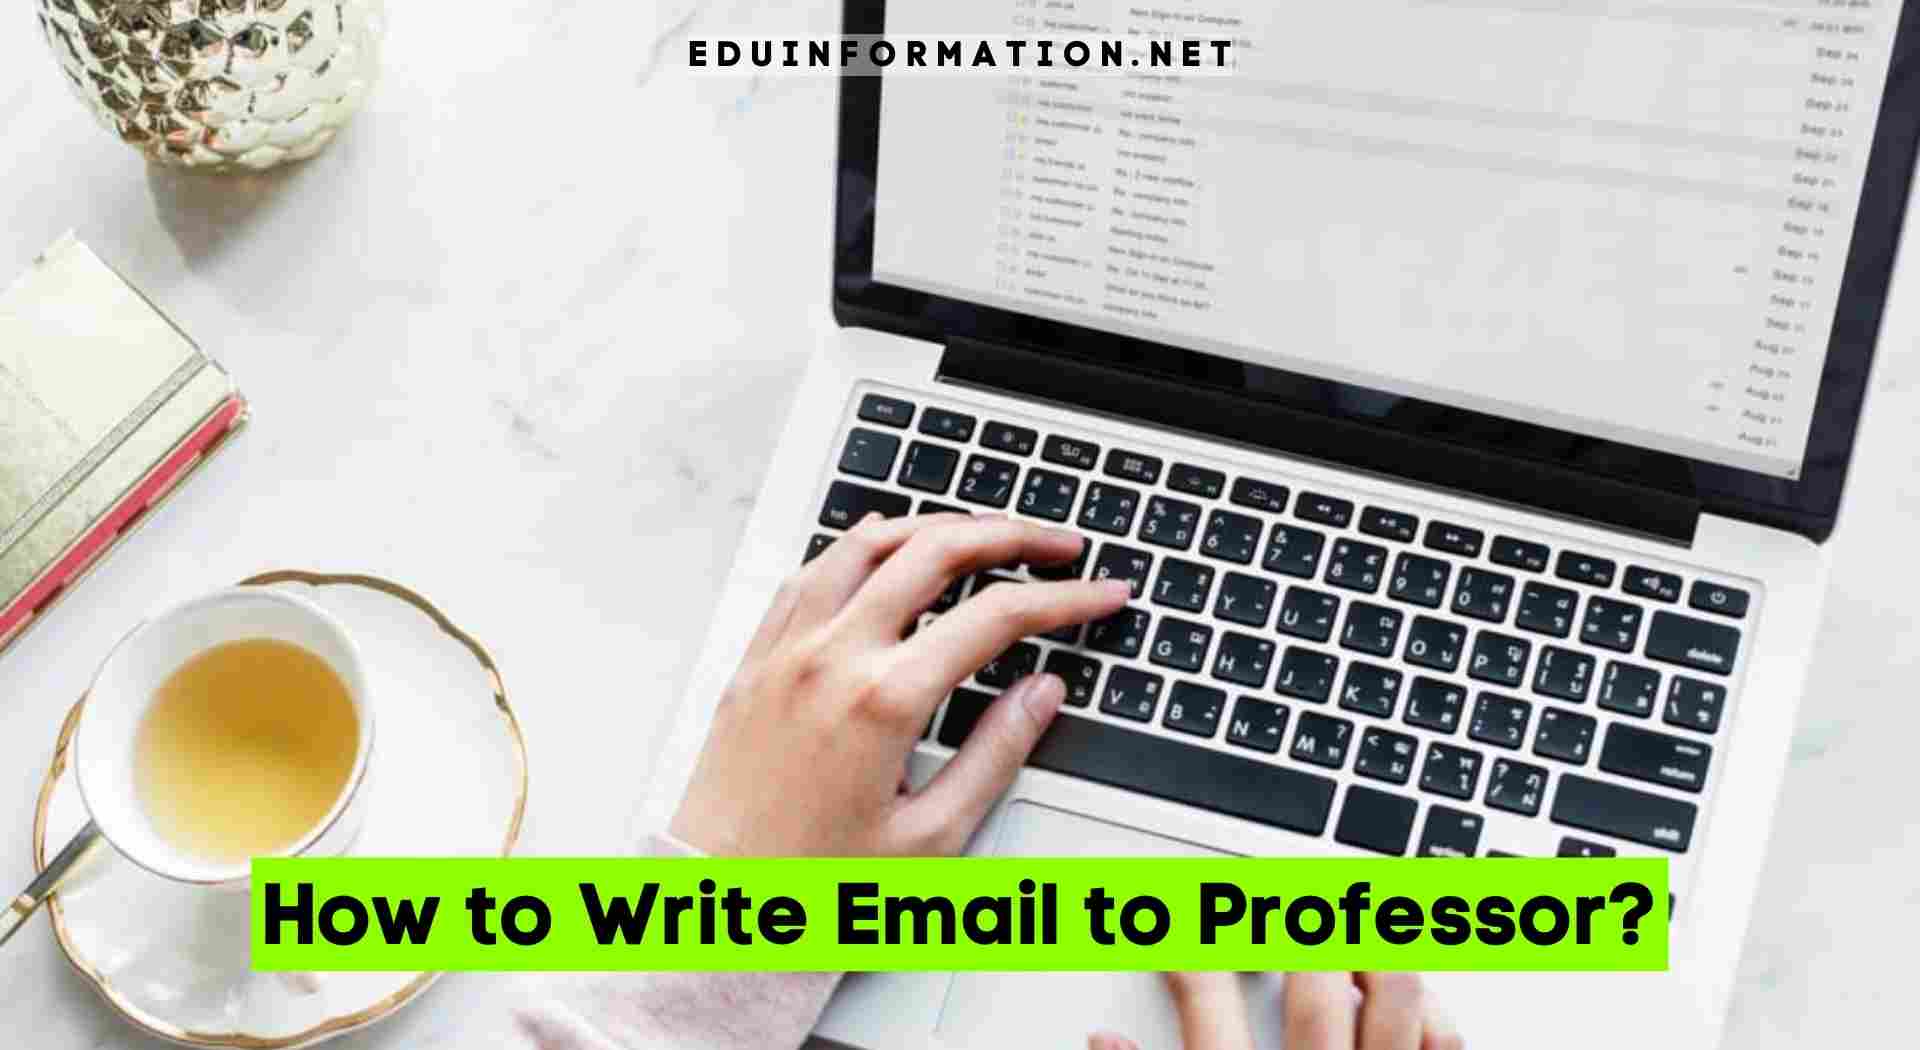 How to Write Email to Professor?